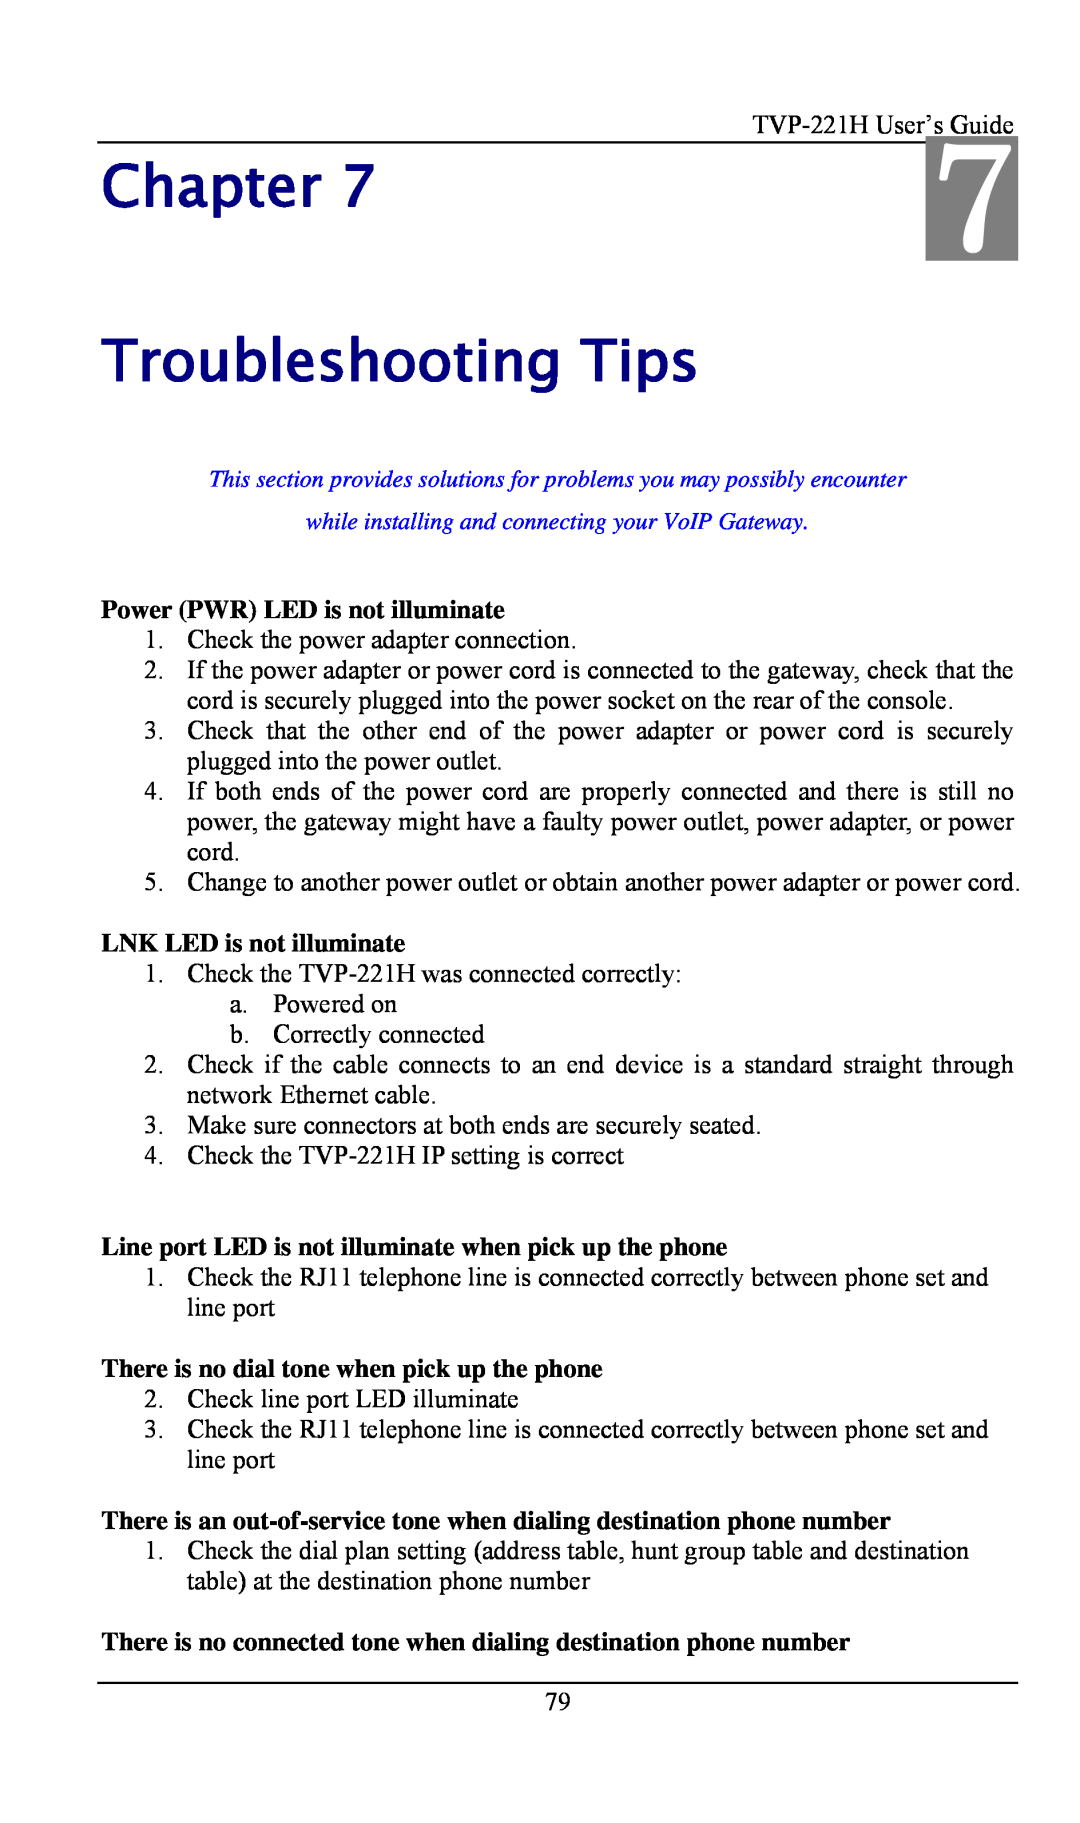 TRENDnet VoIP Gateway, TVP- 221H Chapter Troubleshooting Tips, Power PWR LED is not illuminate, LNK LED is not illuminate 